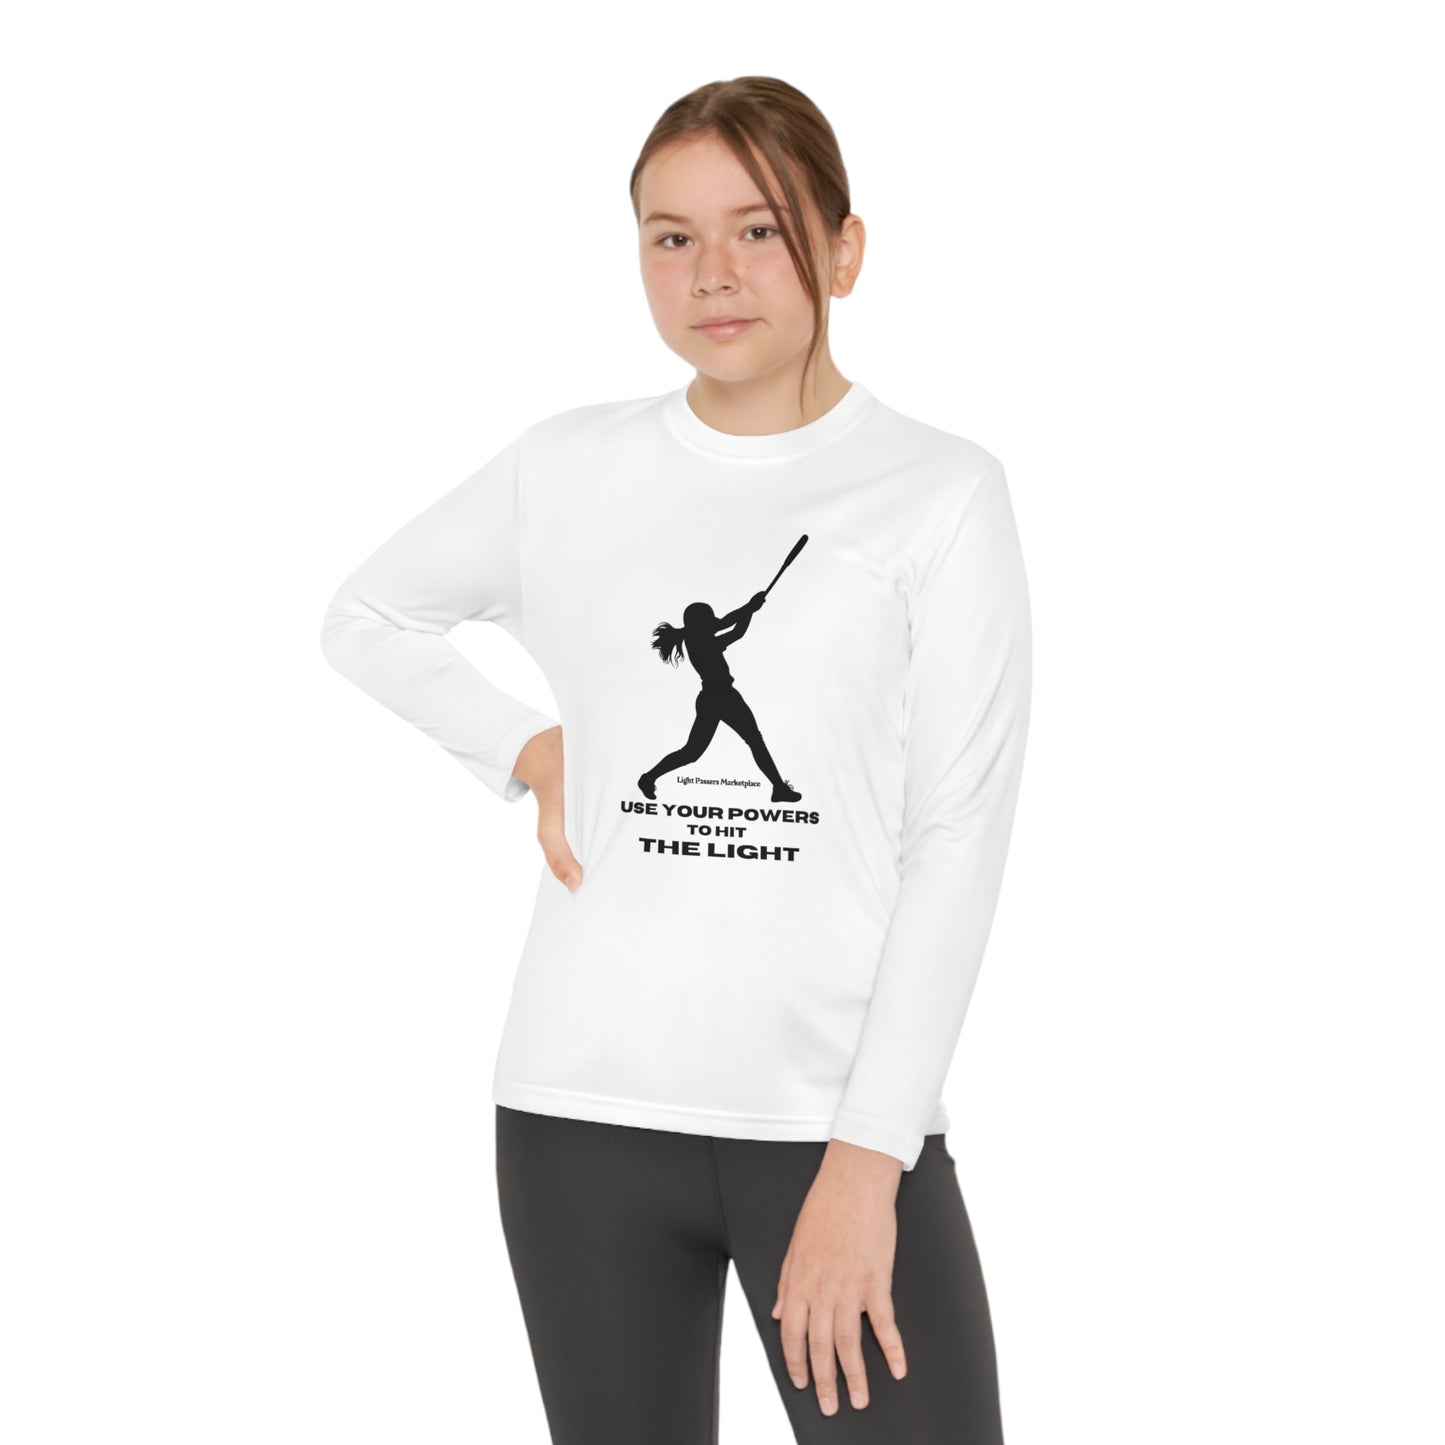 A girl in a silhouette swinging a bat on a white long-sleeve tee. Made of 100% moisture-wicking polyester for active kids. Comfortable, lightweight, and breathable with PosiCharge ® technology.